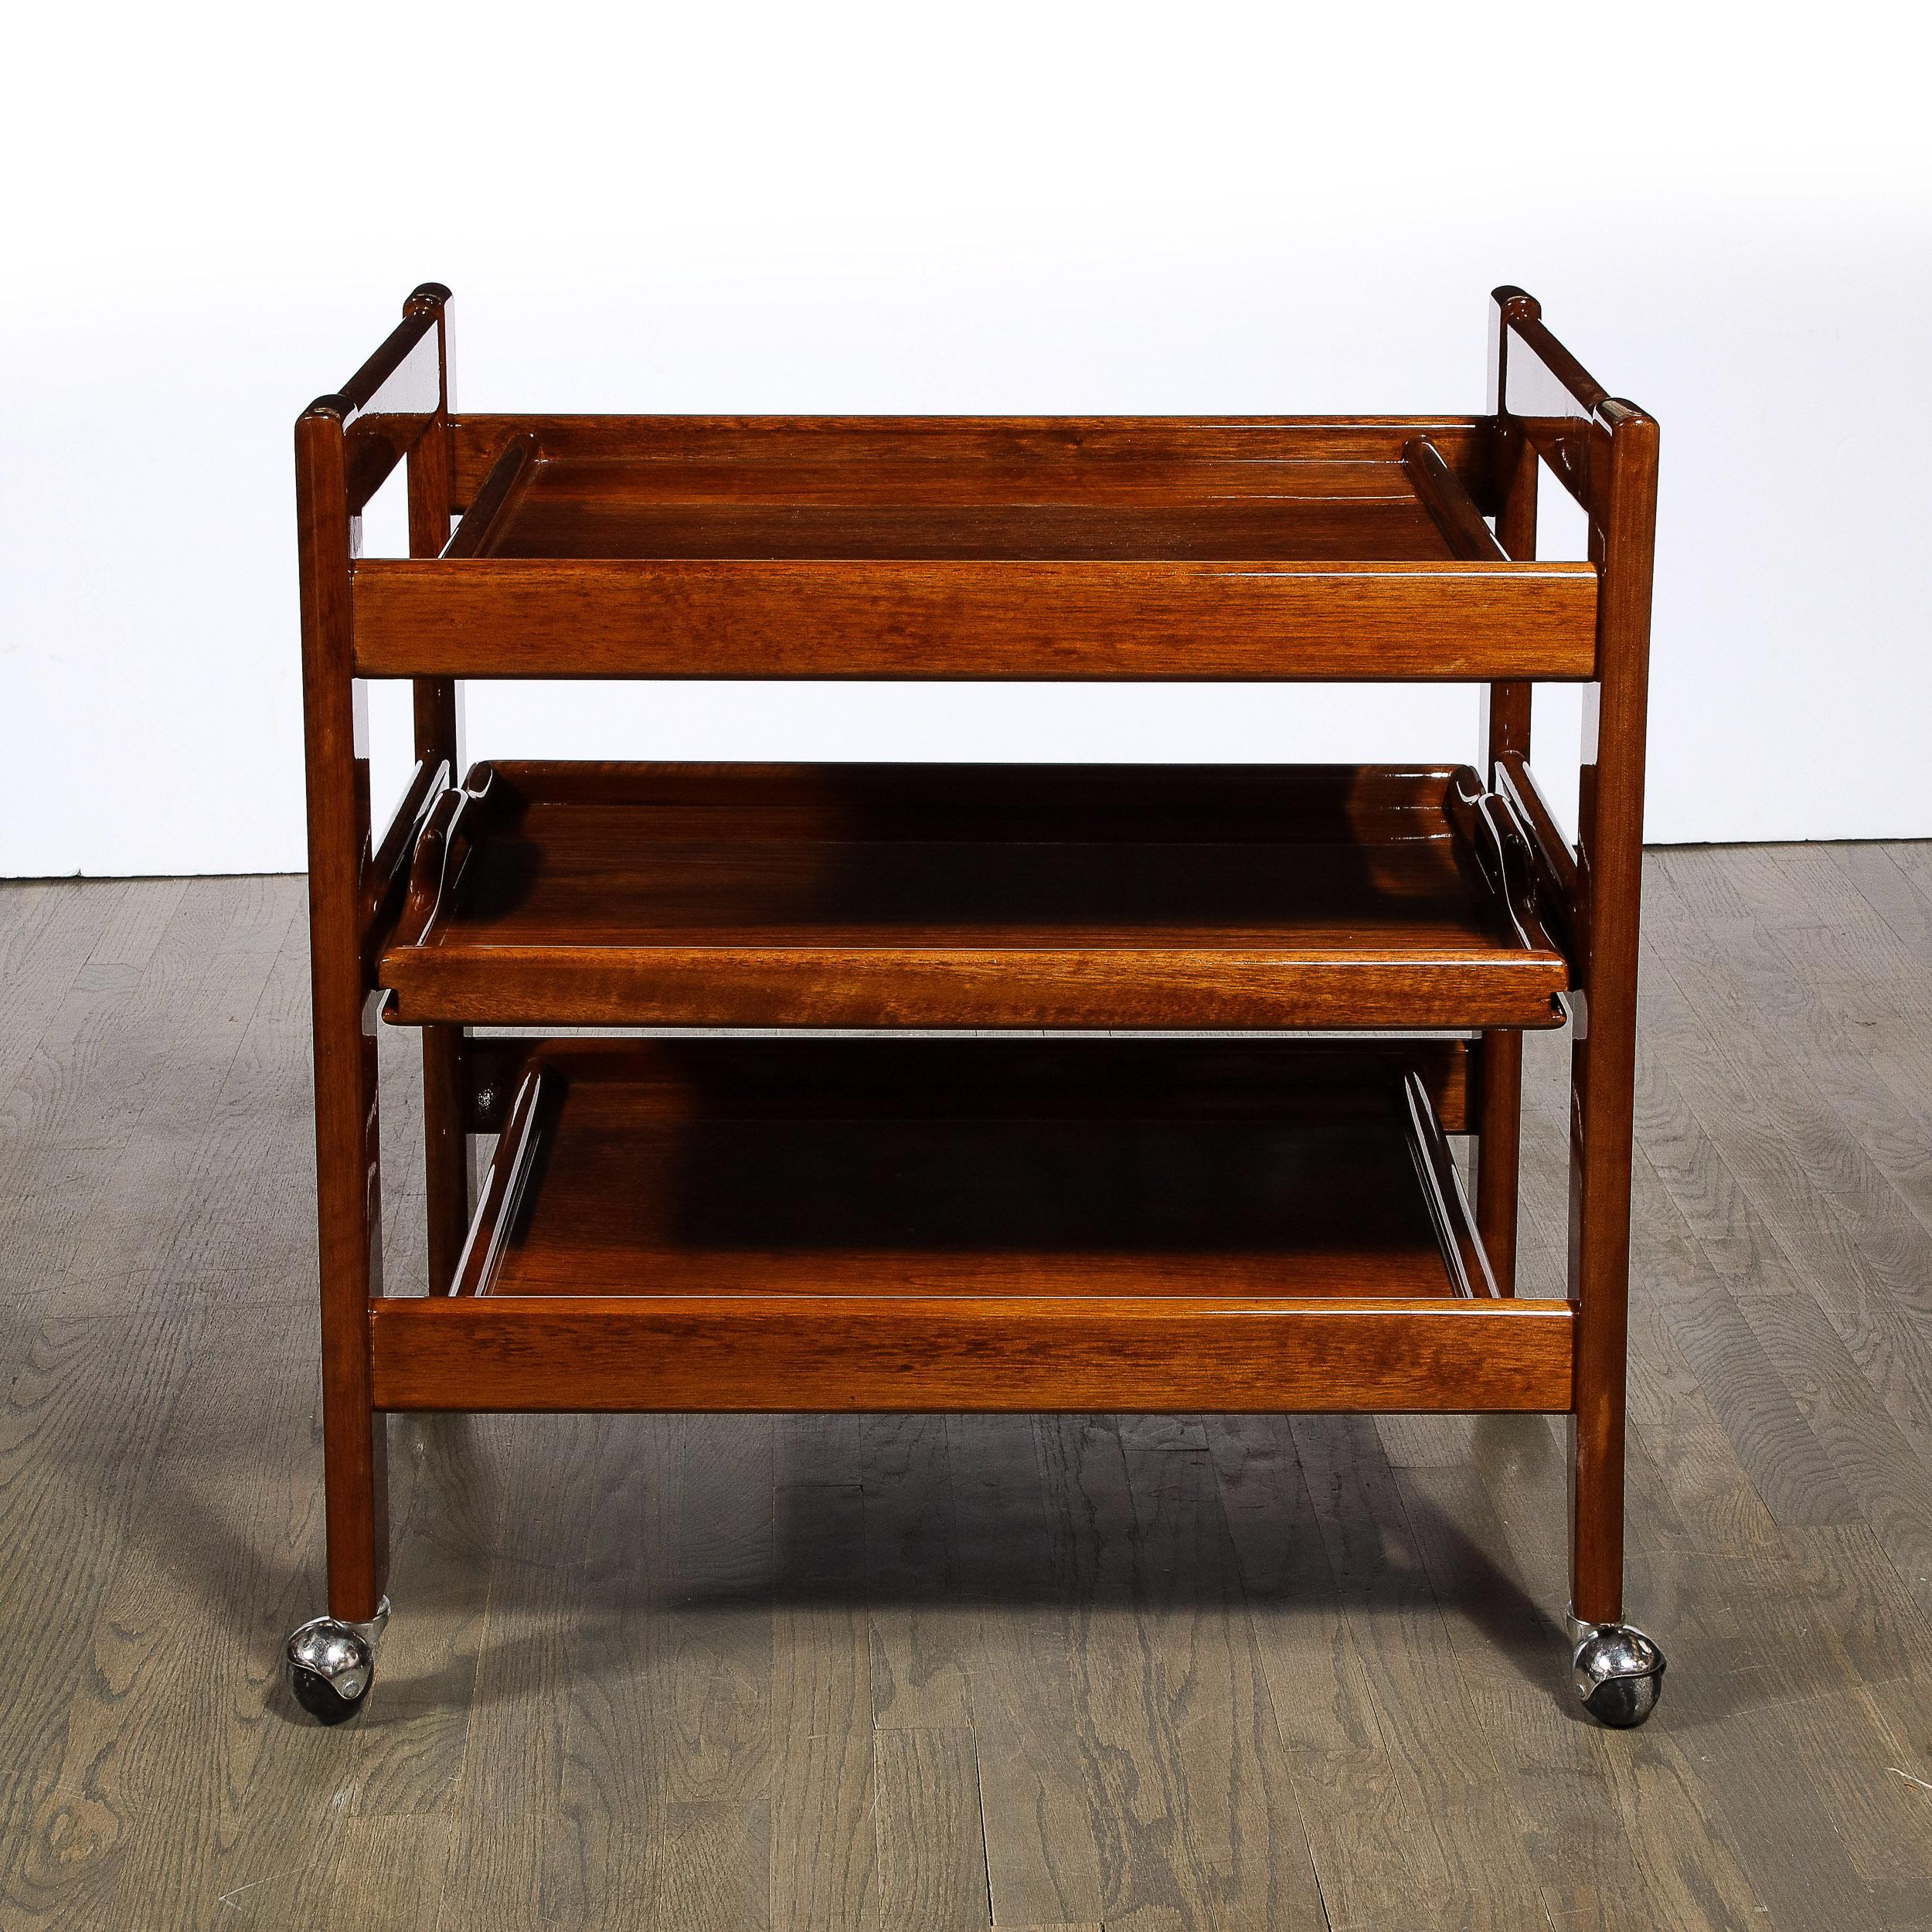 This stunning Mid-Century Modern bar cart was realized in the United States circa 1960. Sitting on aluminum castors, it features a rectilinear form consisting of two right angled hard geometric u-form sides structurally reinforced by side and end